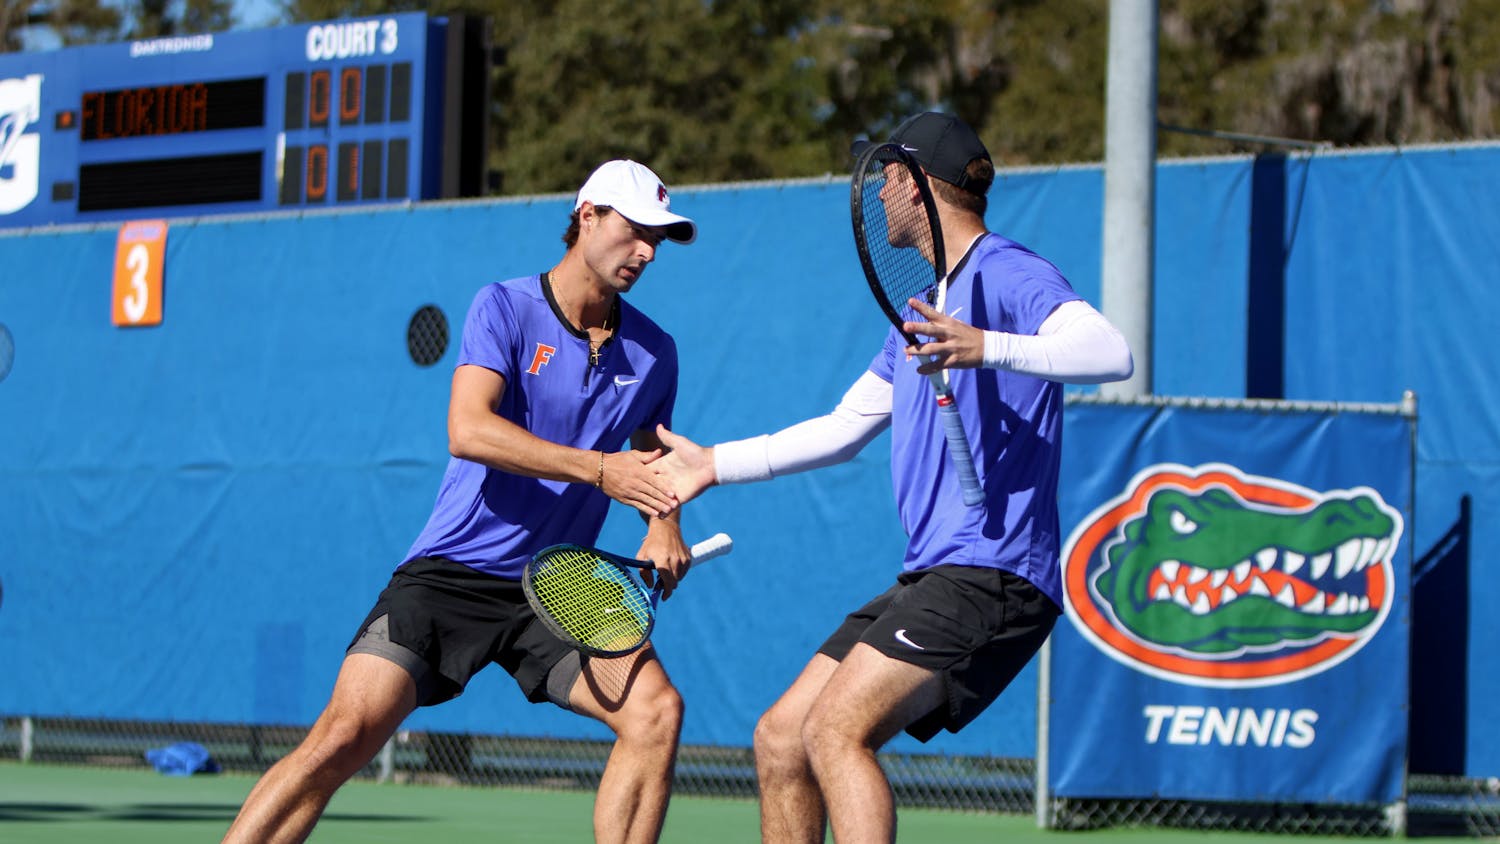 Gators Axel Nefve (left) and Will Grant (right) share the court in their doubles match during Florida’s 5-2 loss to Texas Sunday, Jan. 15, 2023. Nefve and Grant lost to the No. 7-ranked pair of Longhorns Cleeve Harper and Eliot Spizzirri.